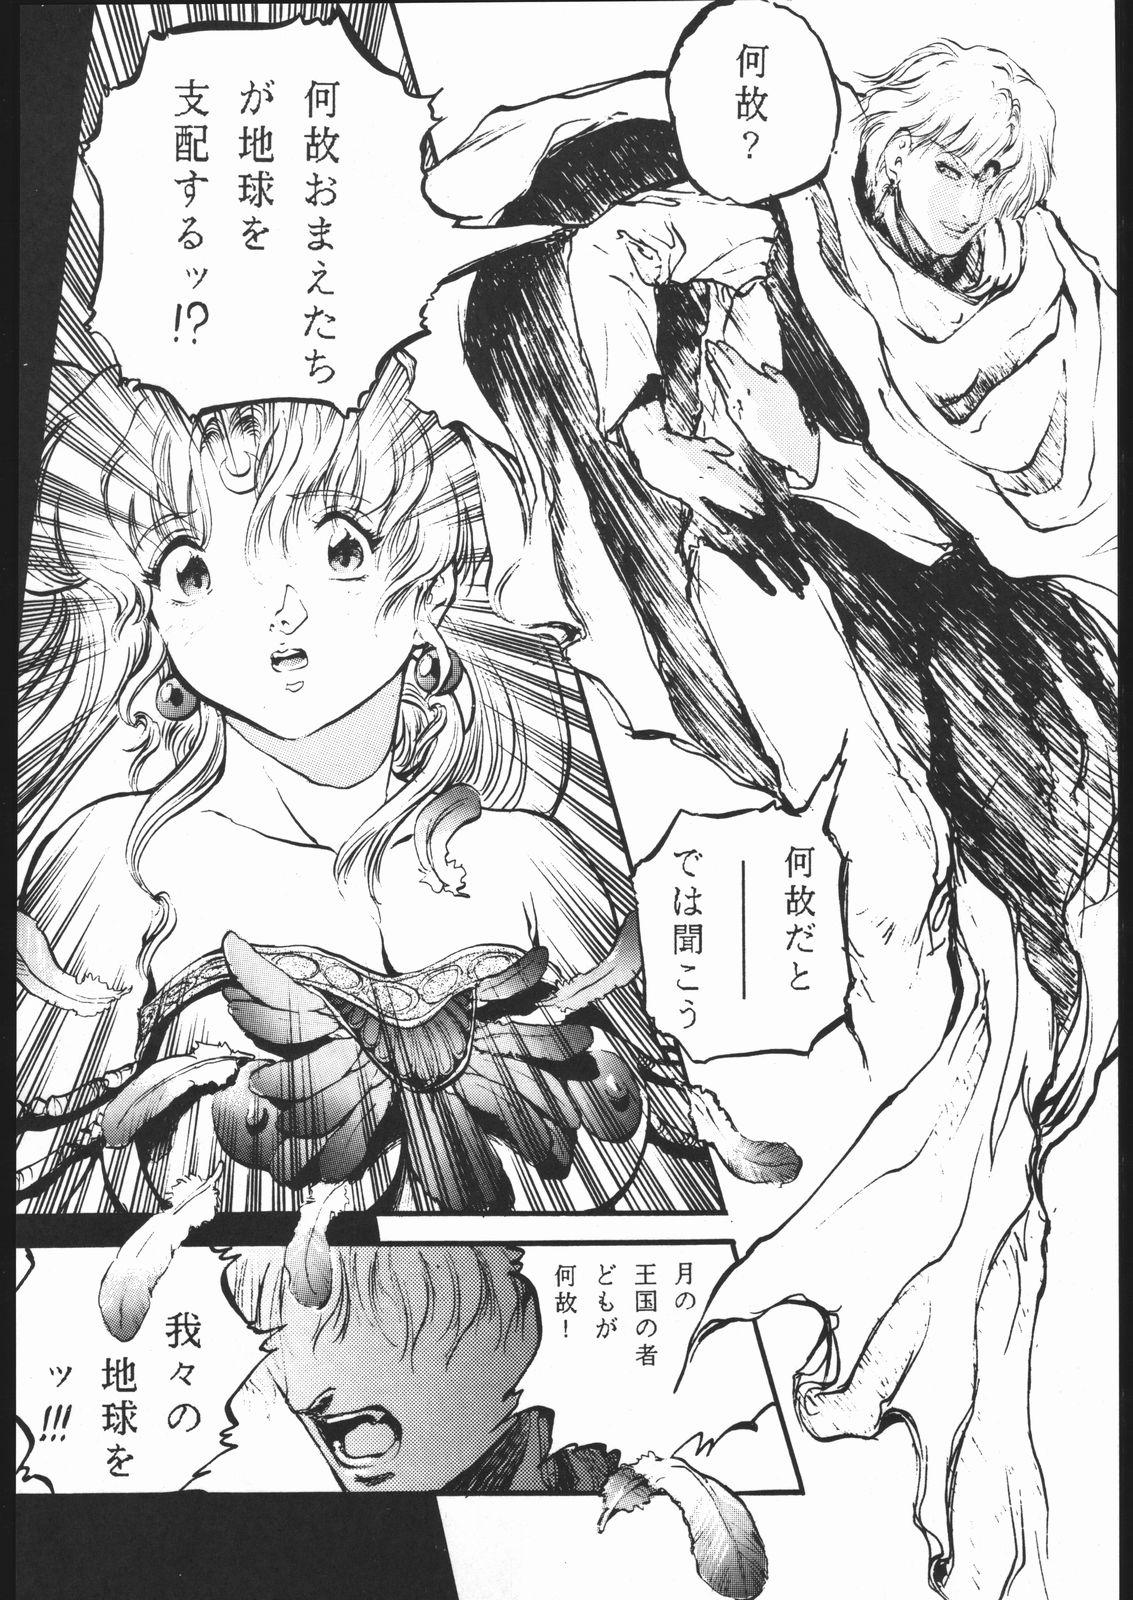 Hairy Pussy KATZE 8 - Sailor moon Tenchi muyo Ghost sweeper mikami Giant robo Victory gundam Glamour Porn - Page 7